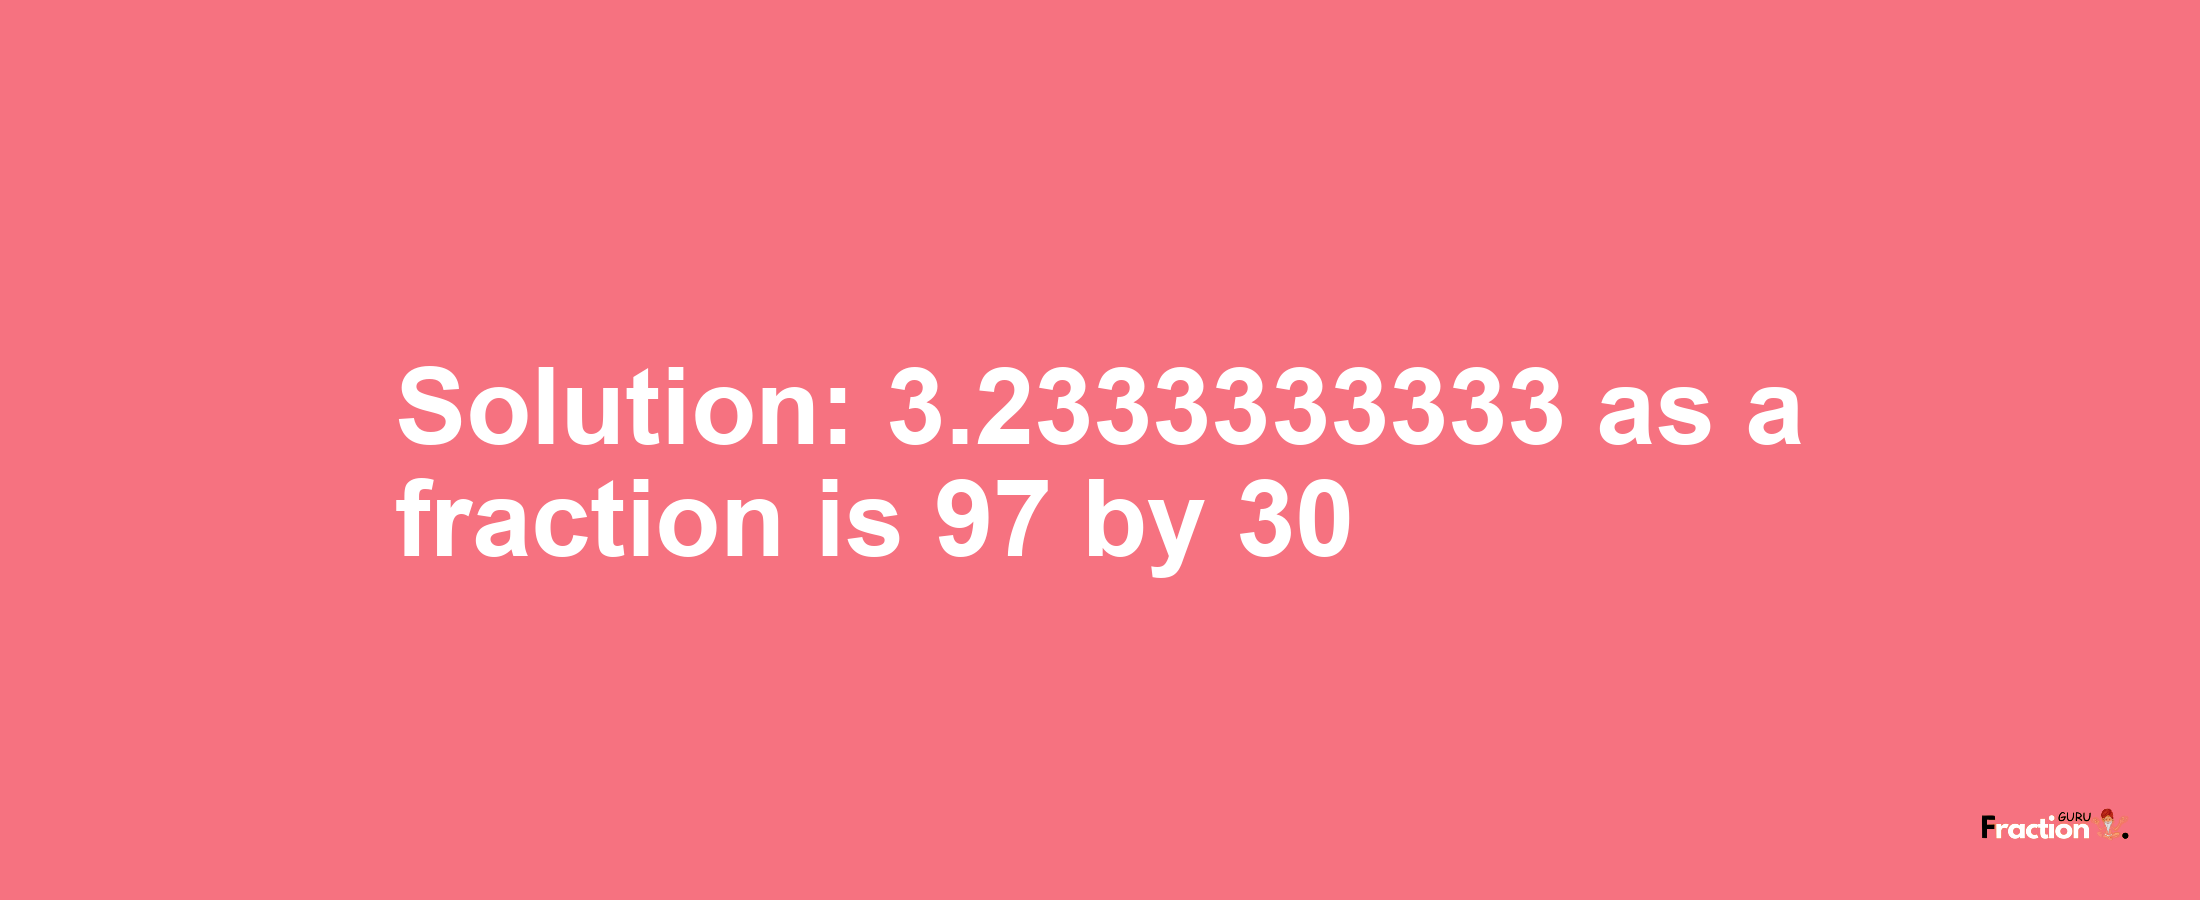 Solution:3.2333333333 as a fraction is 97/30